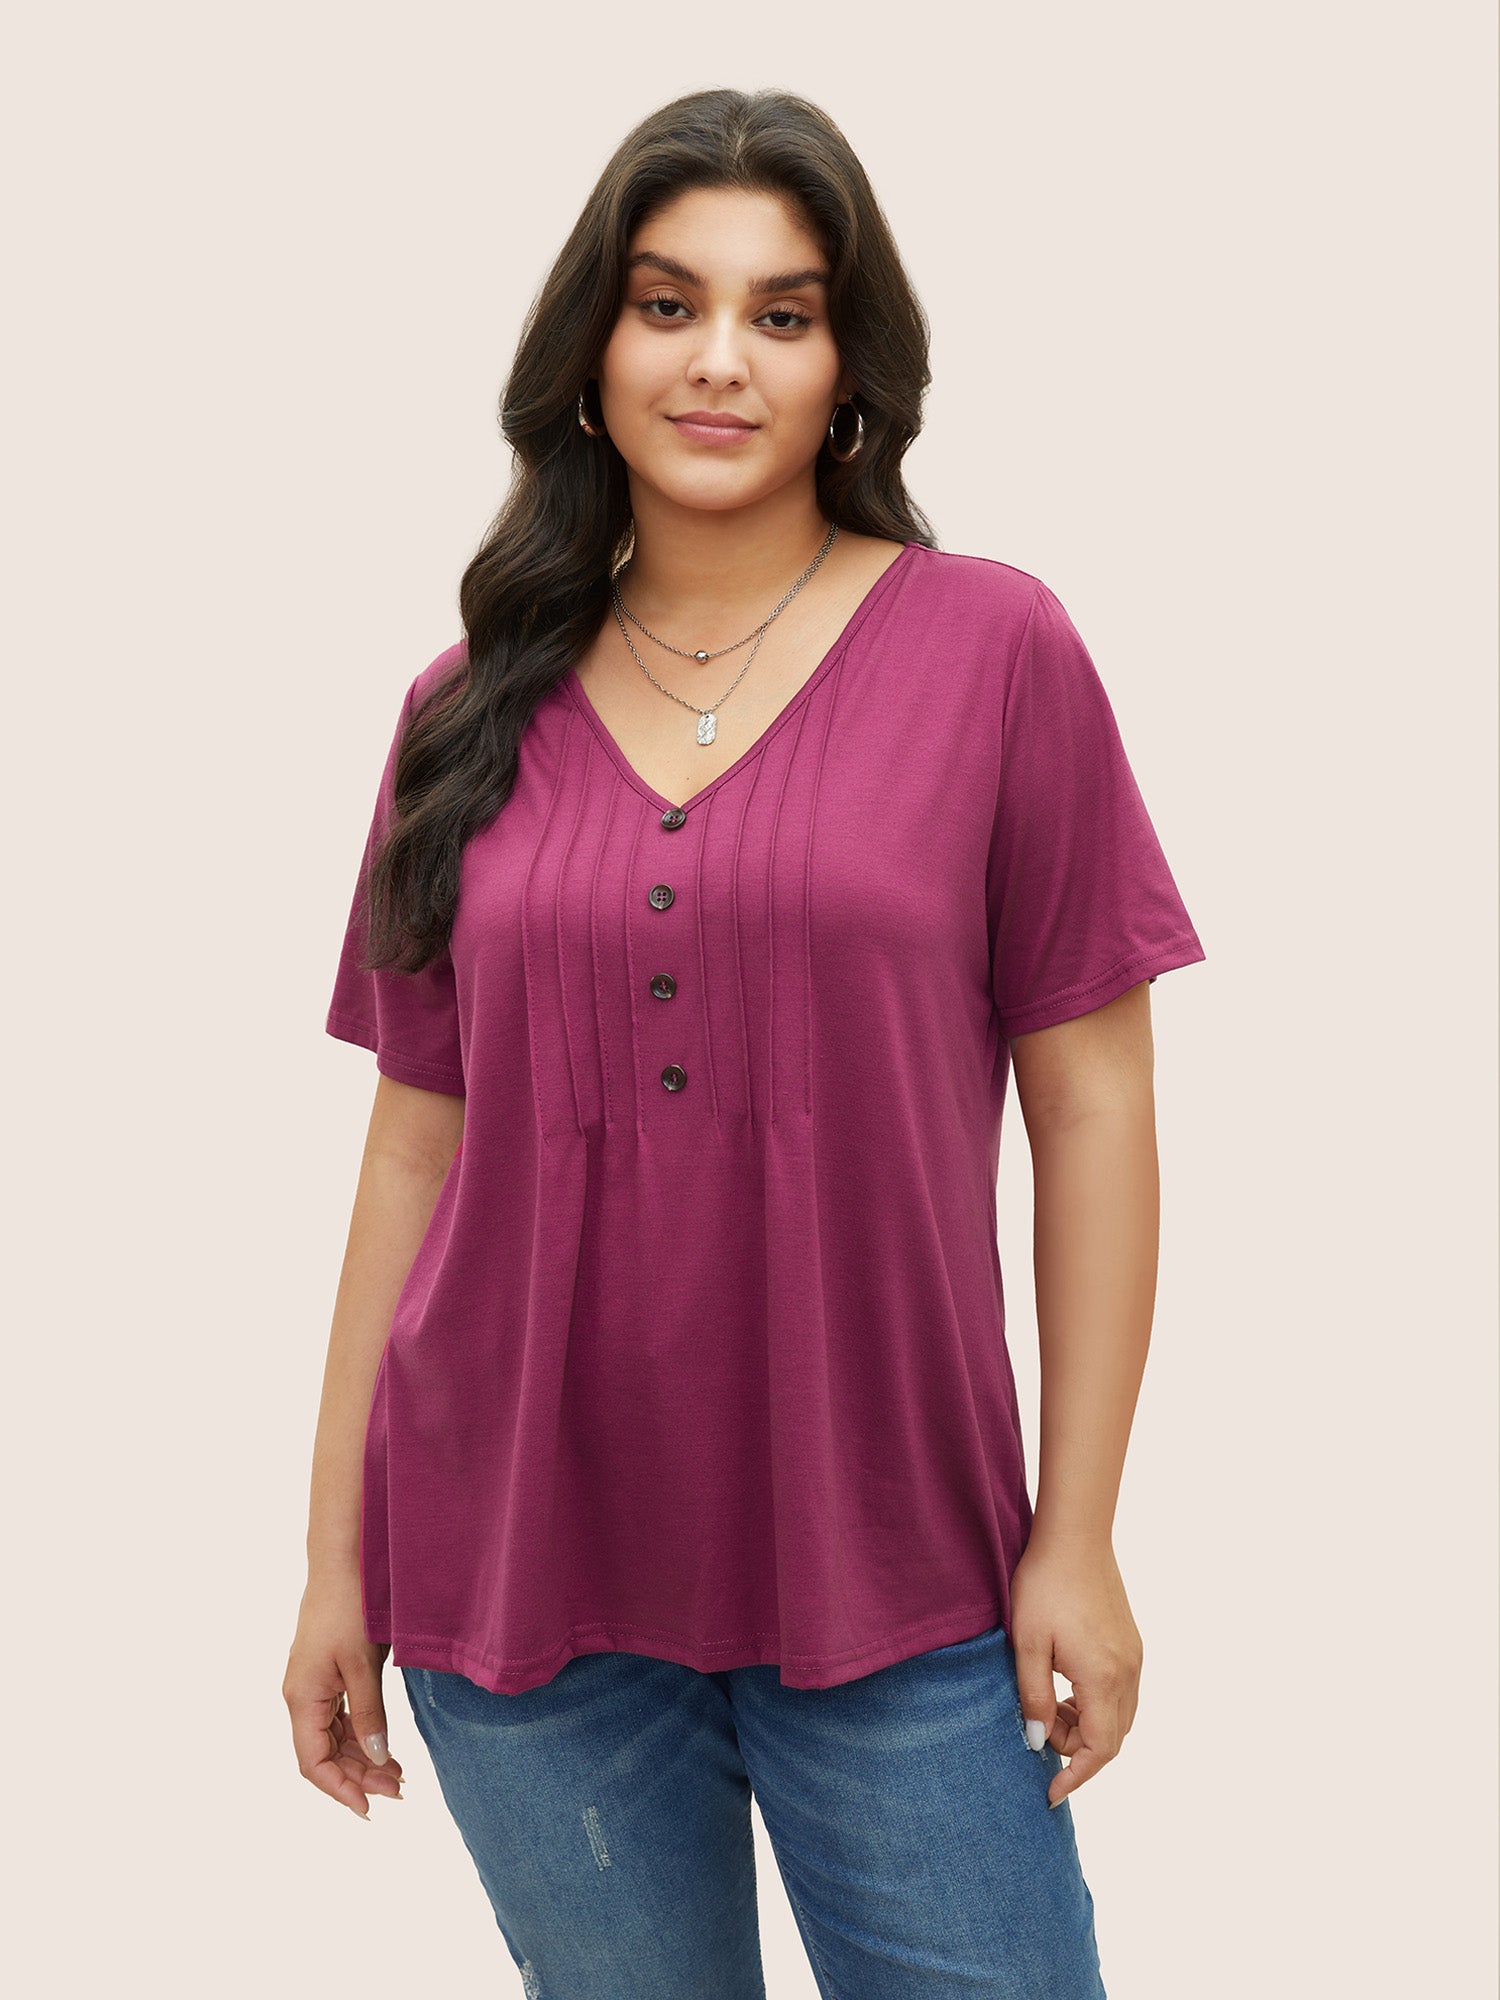 

Plus Size Women Everyday Plain Button Regular Sleeve Short sleeve V-neck Casual T-shirts BloomChic, Red-violet